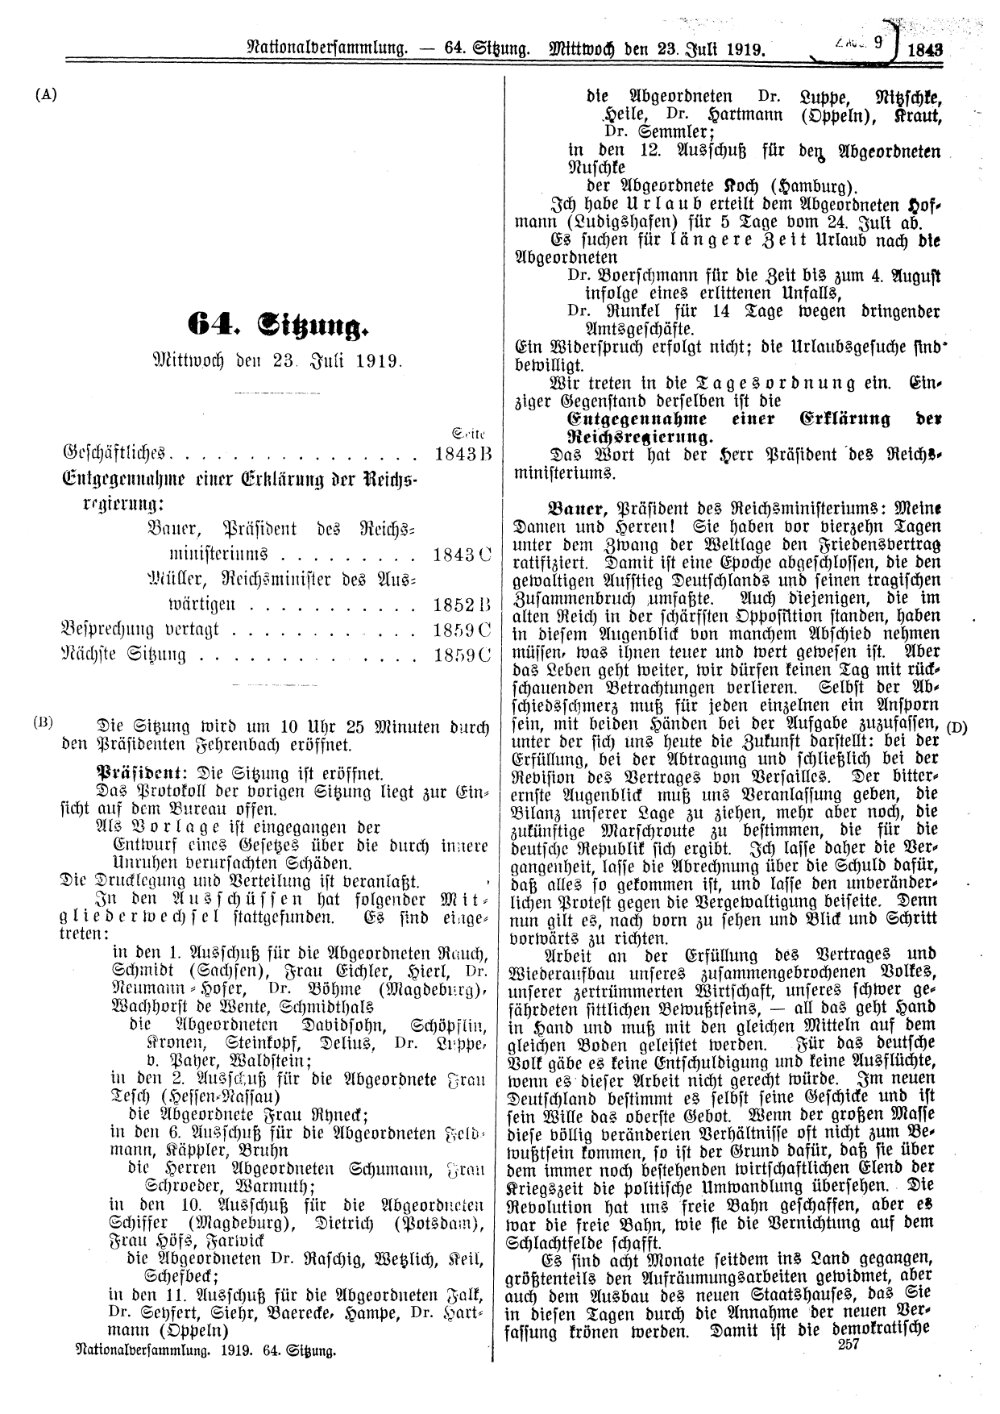 Scan of page 1843